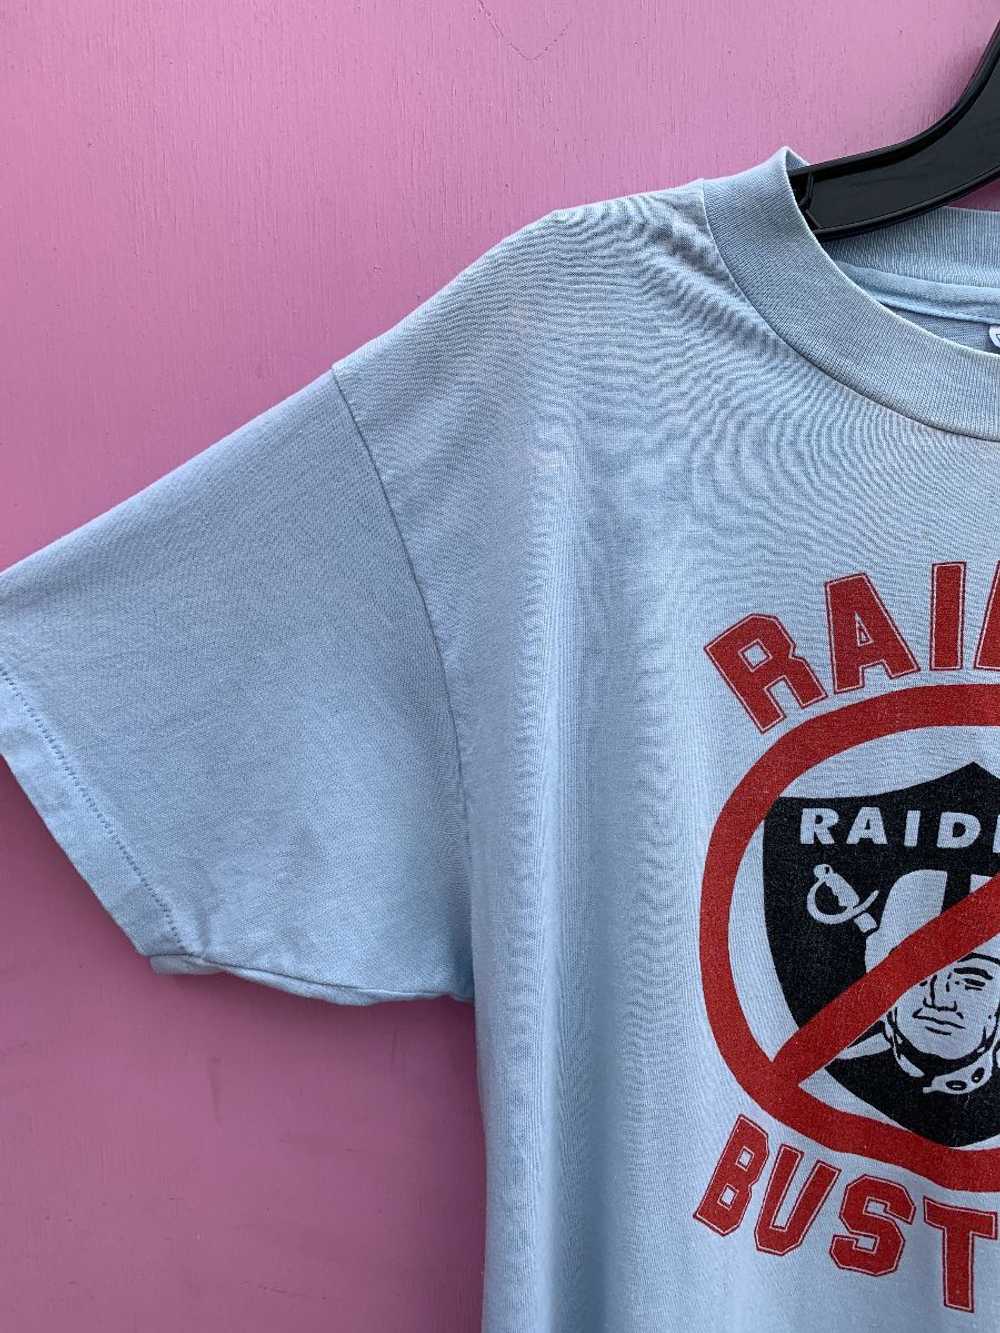 1980S NFL RAIDER BUSTER GRAPHIC SINGLE STITCH T-S… - image 3